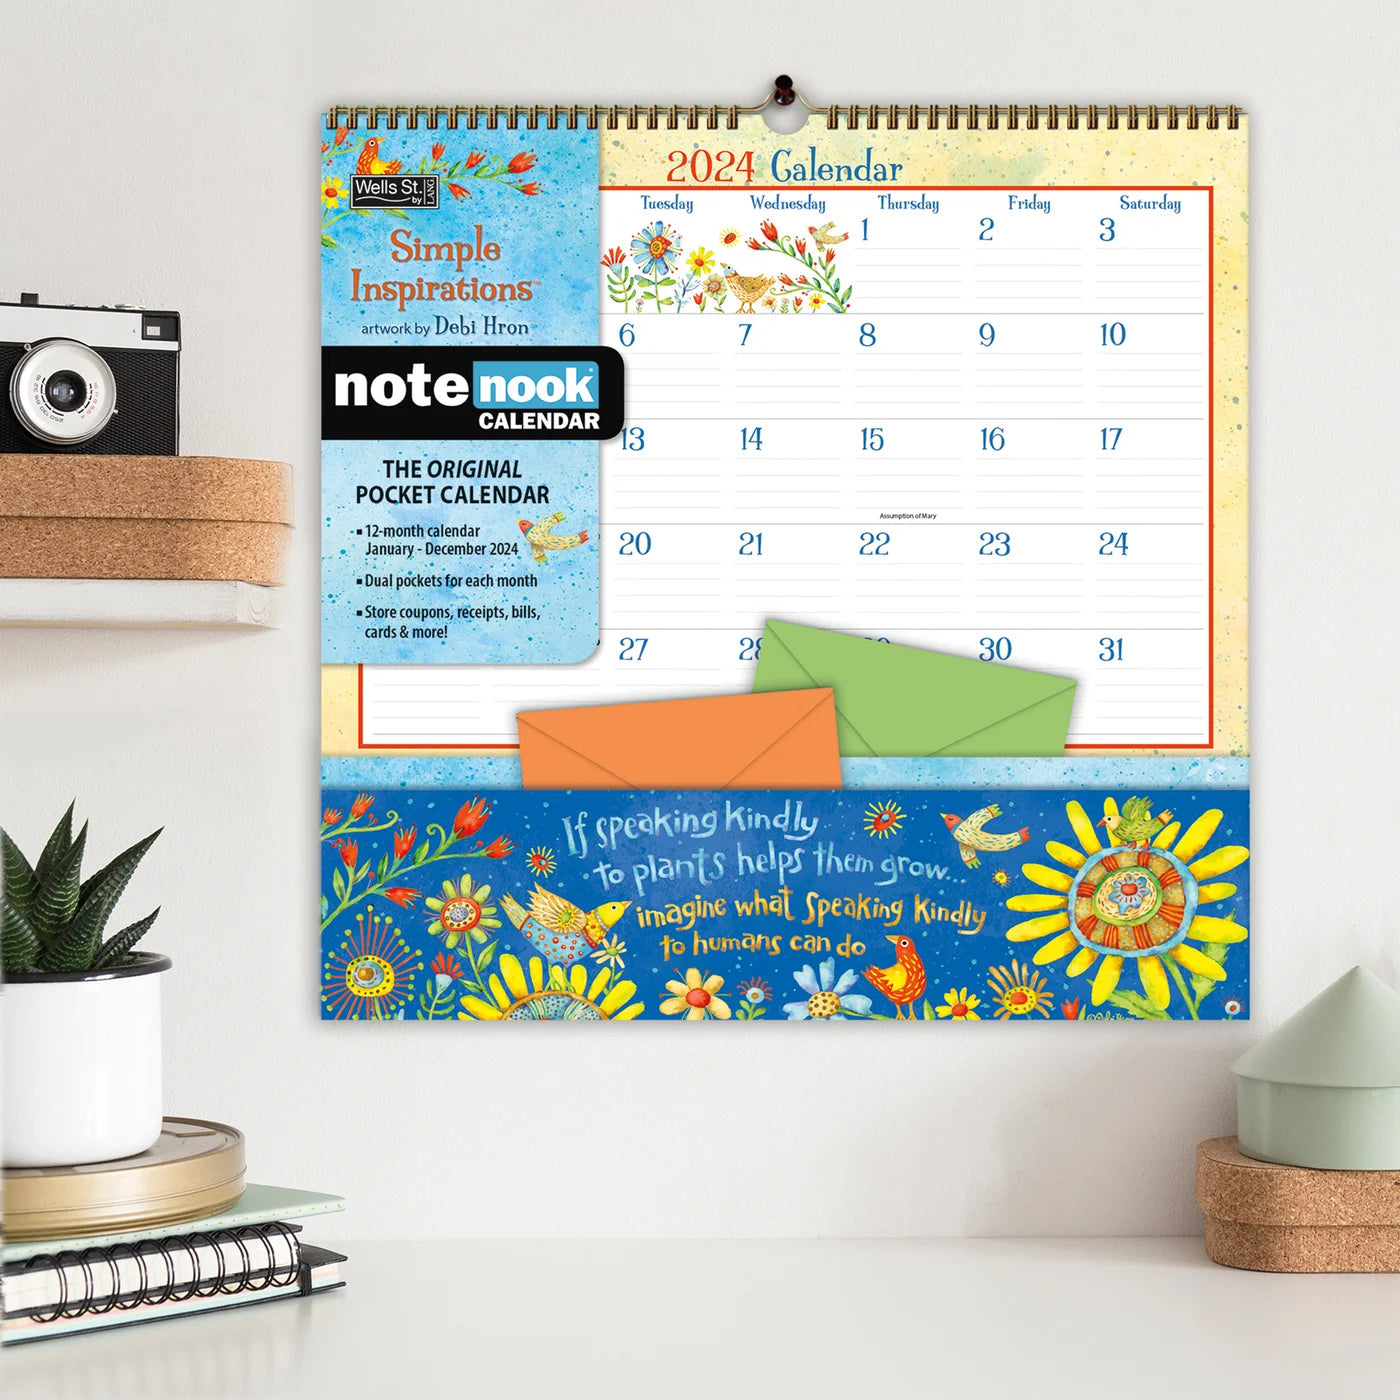 2024 Simple Inspirations - Note Nook Square Wall Calendar